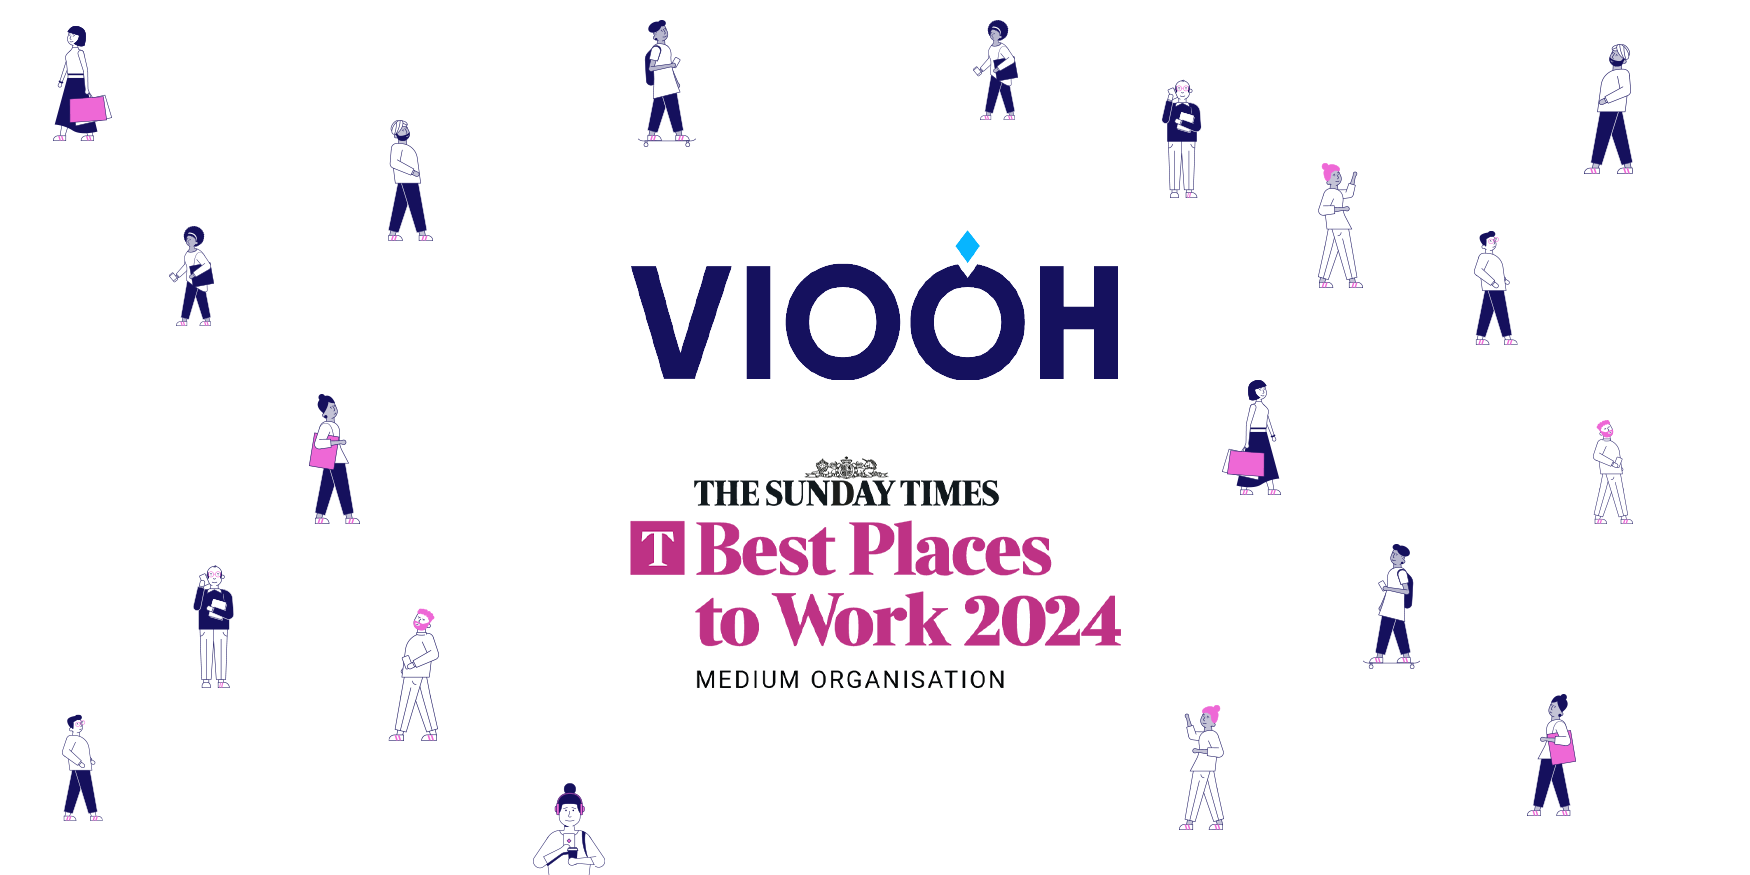 VIOOH_Best Places to Work 2024